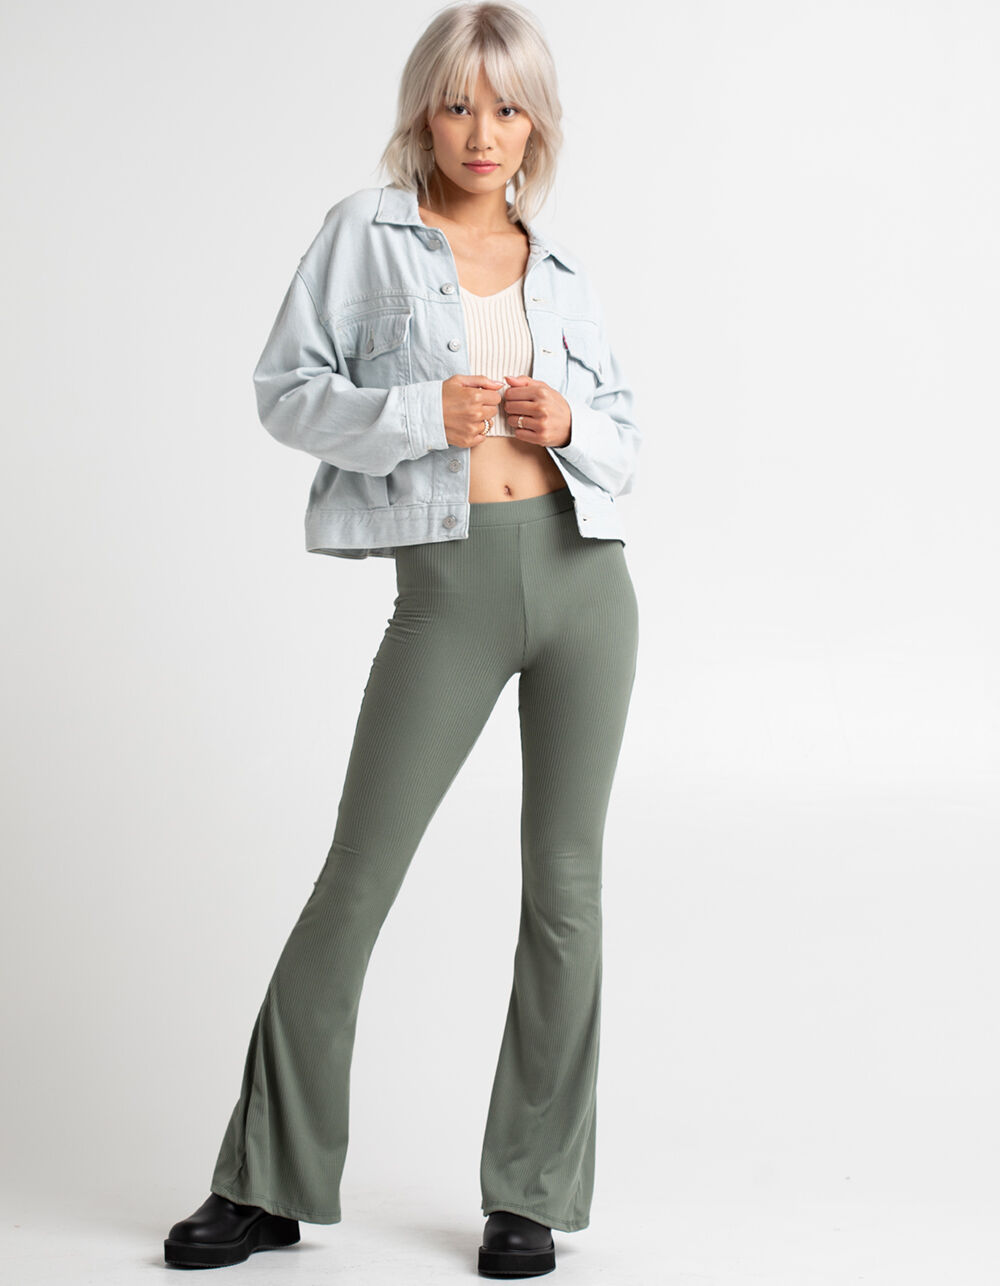 SKY AND SPARROW Rib Flare Womens Pants - SAGE | Tillys